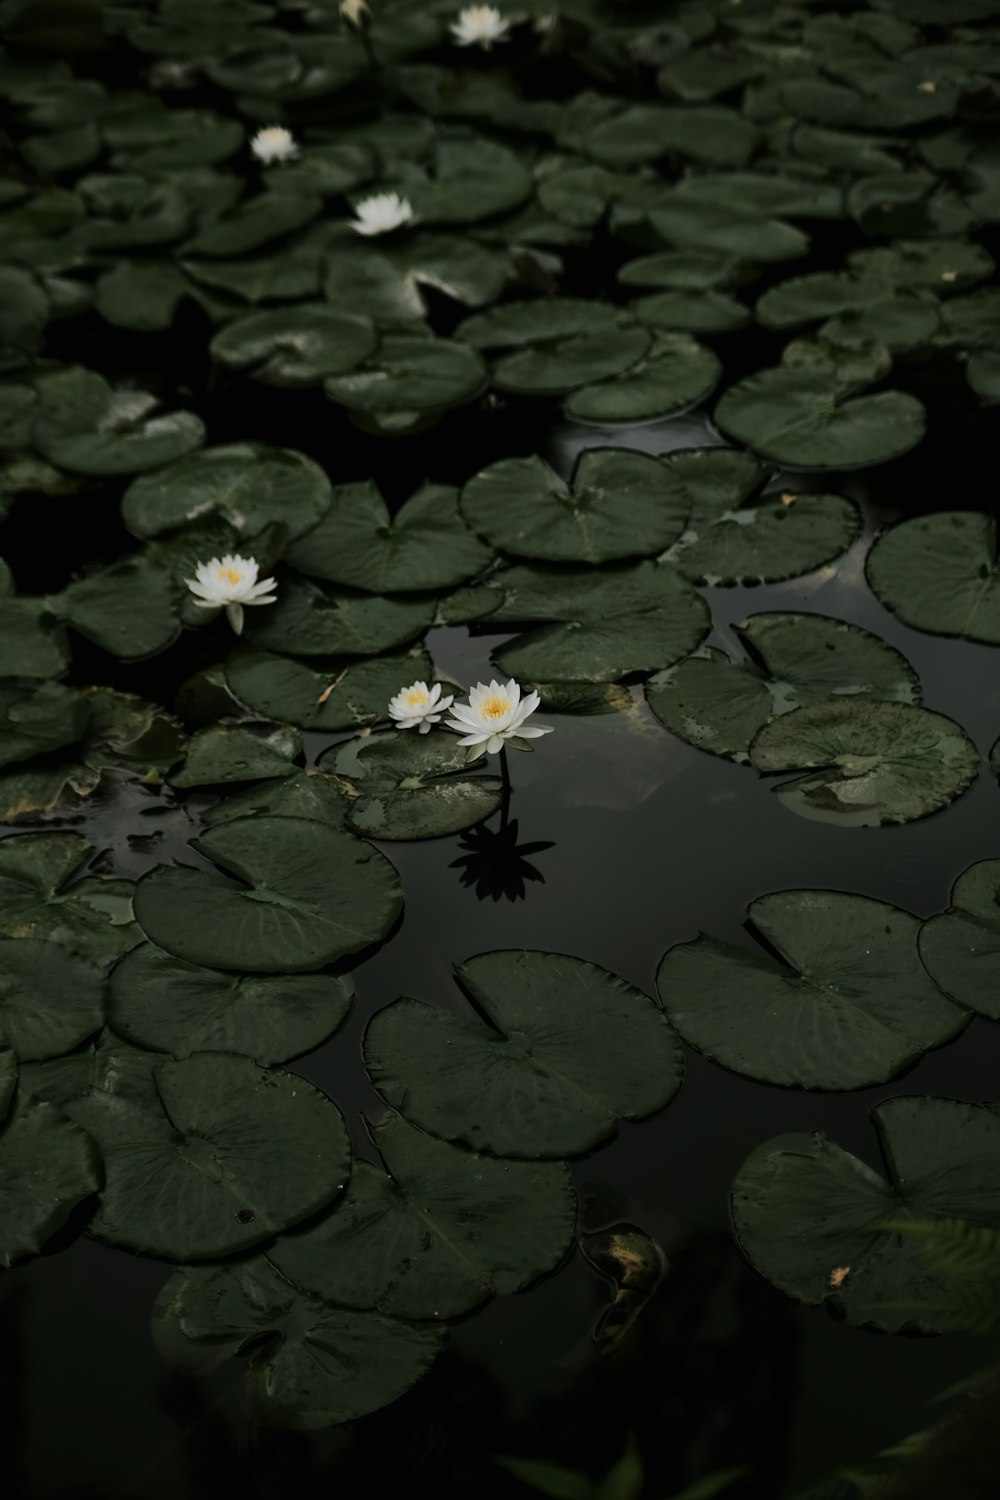 water lilies in a pond with lily pads